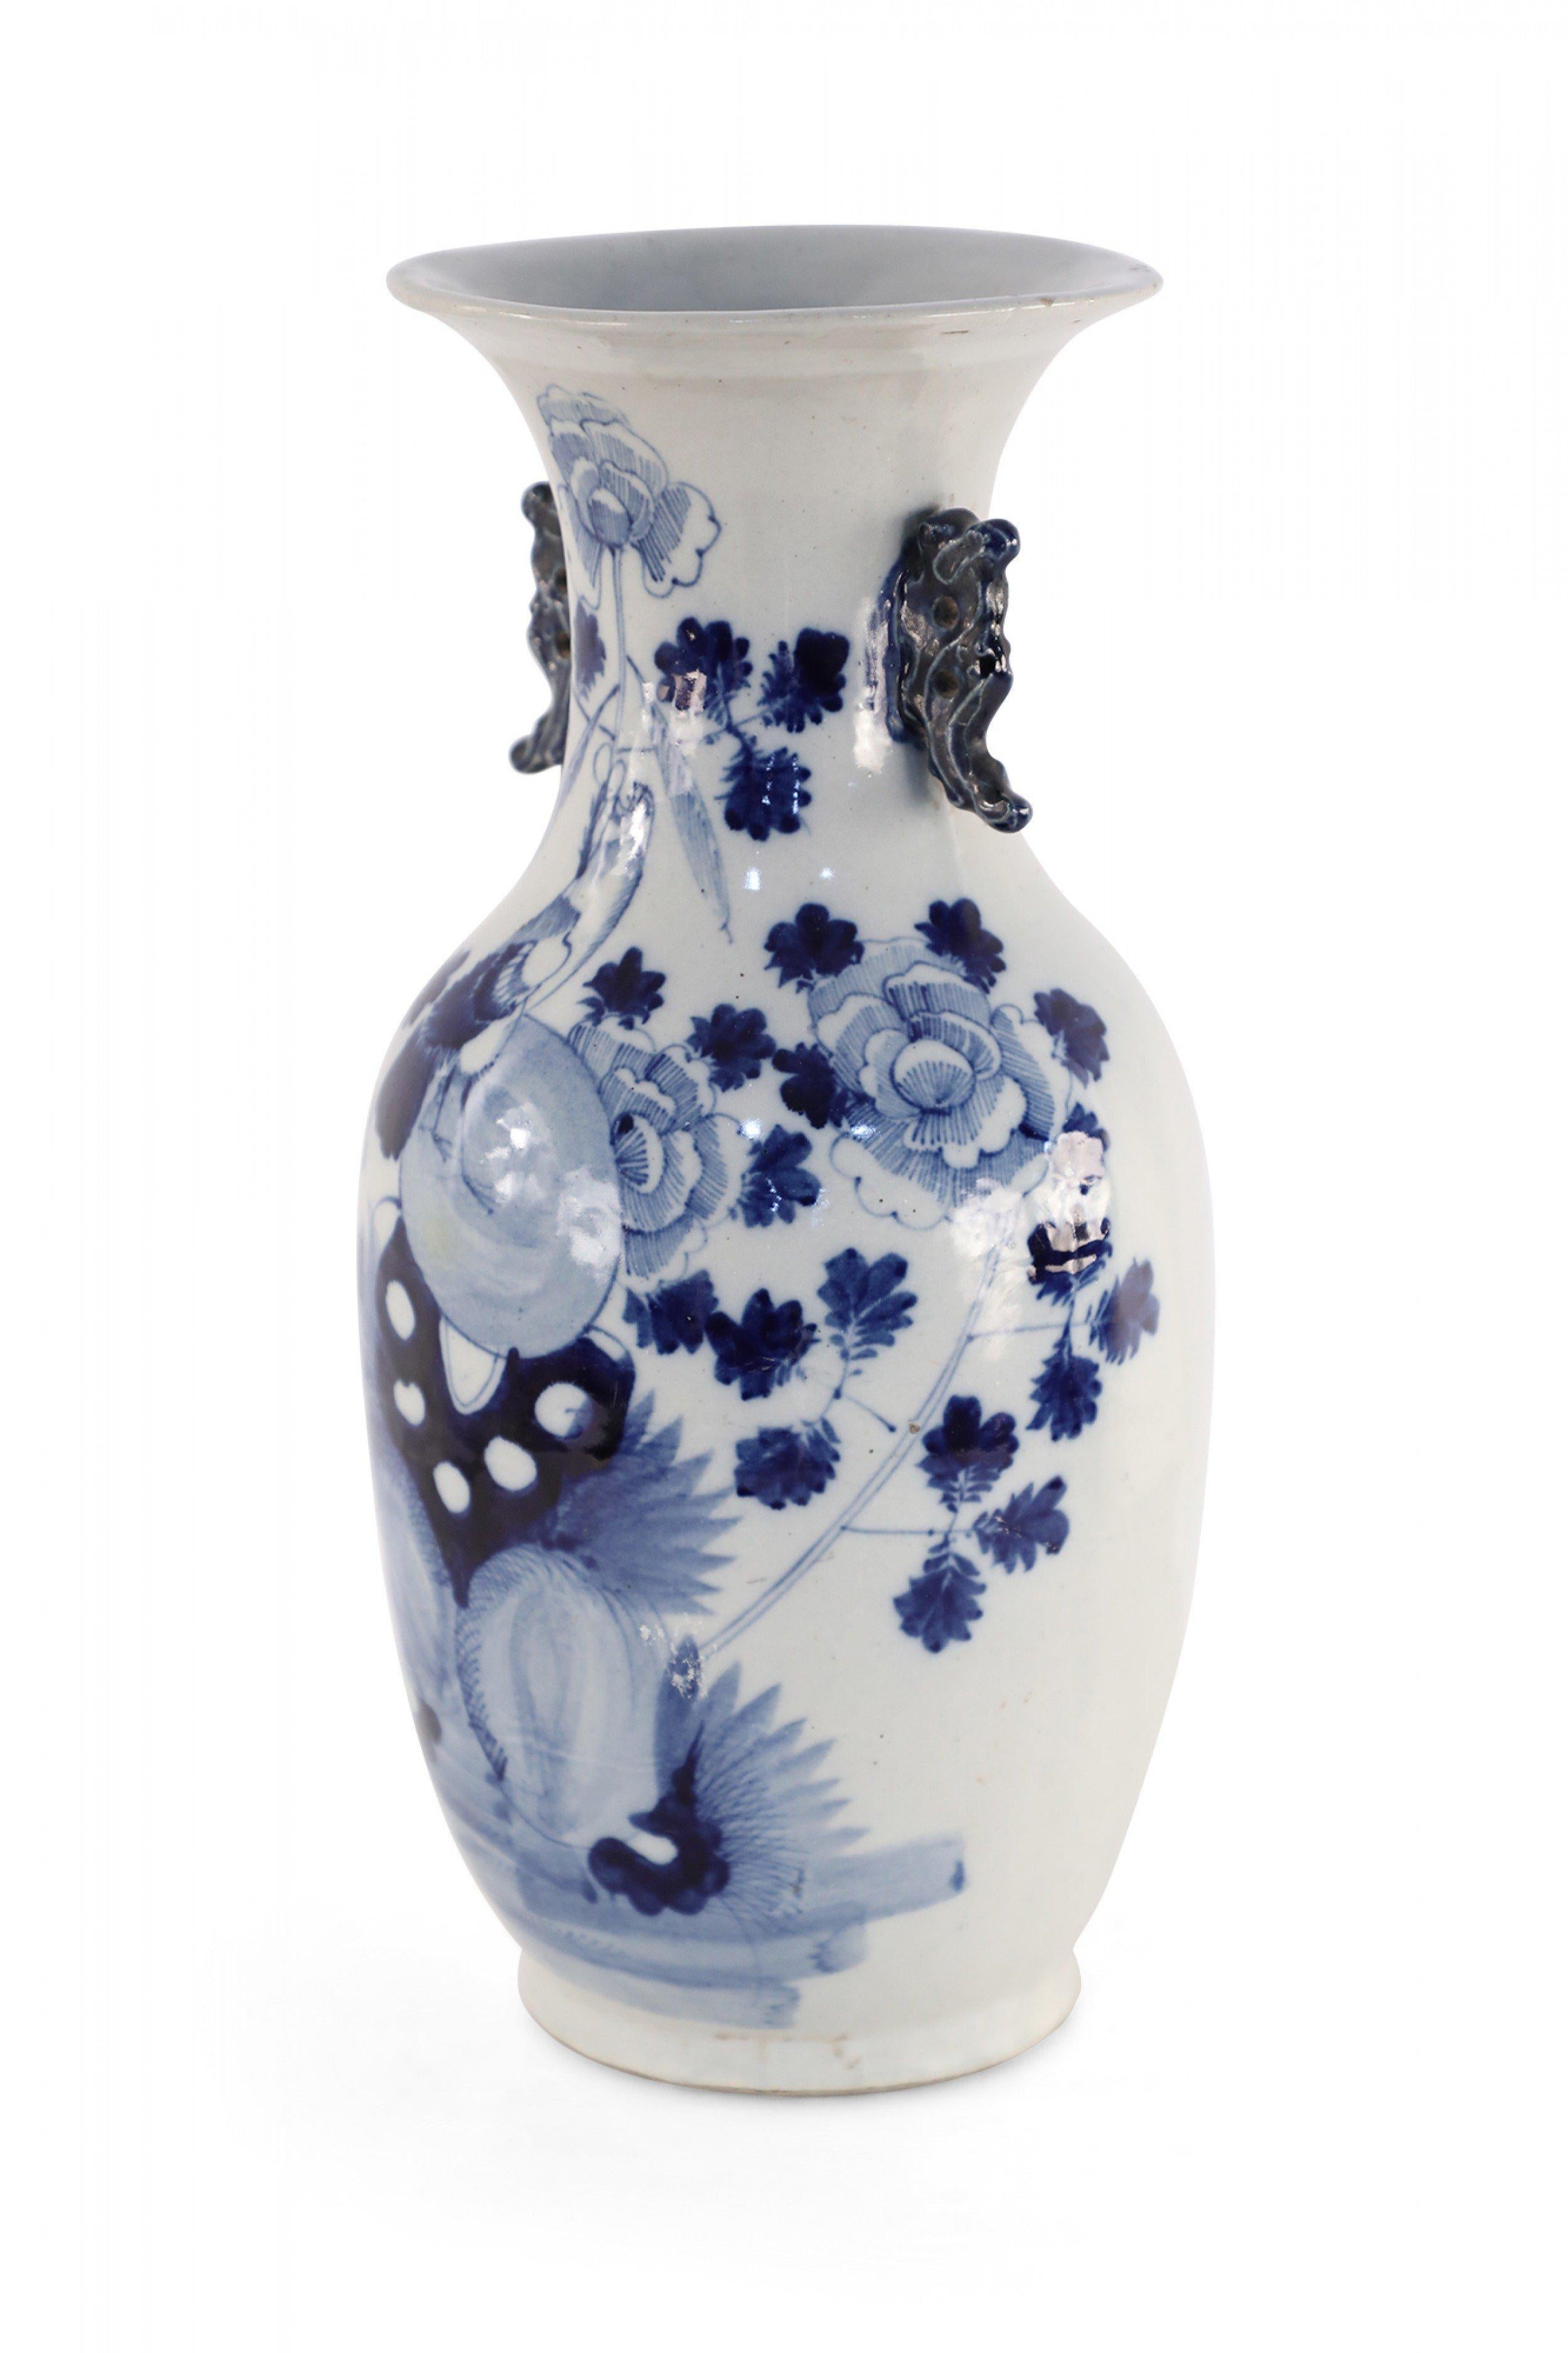 Antique Chinese (Late 19th Century) white and blue porcelain urn decorated with a lily pad and floral motif, and accented in two navy scrolled handles along the neck.
   